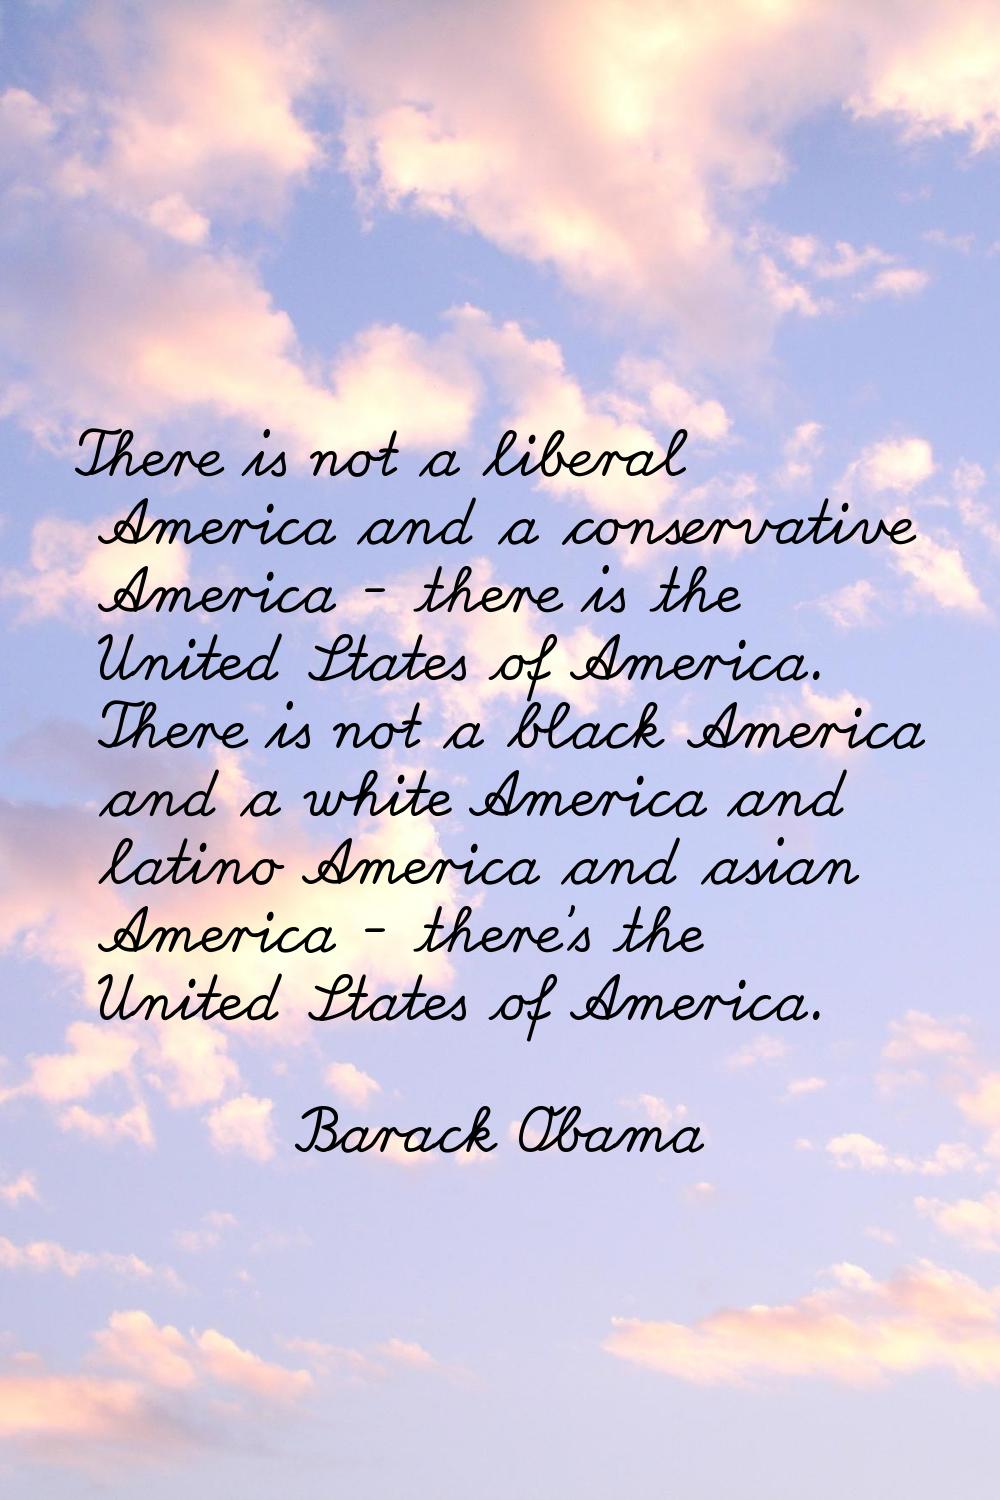 There is not a liberal America and a conservative America - there is the United States of America. 